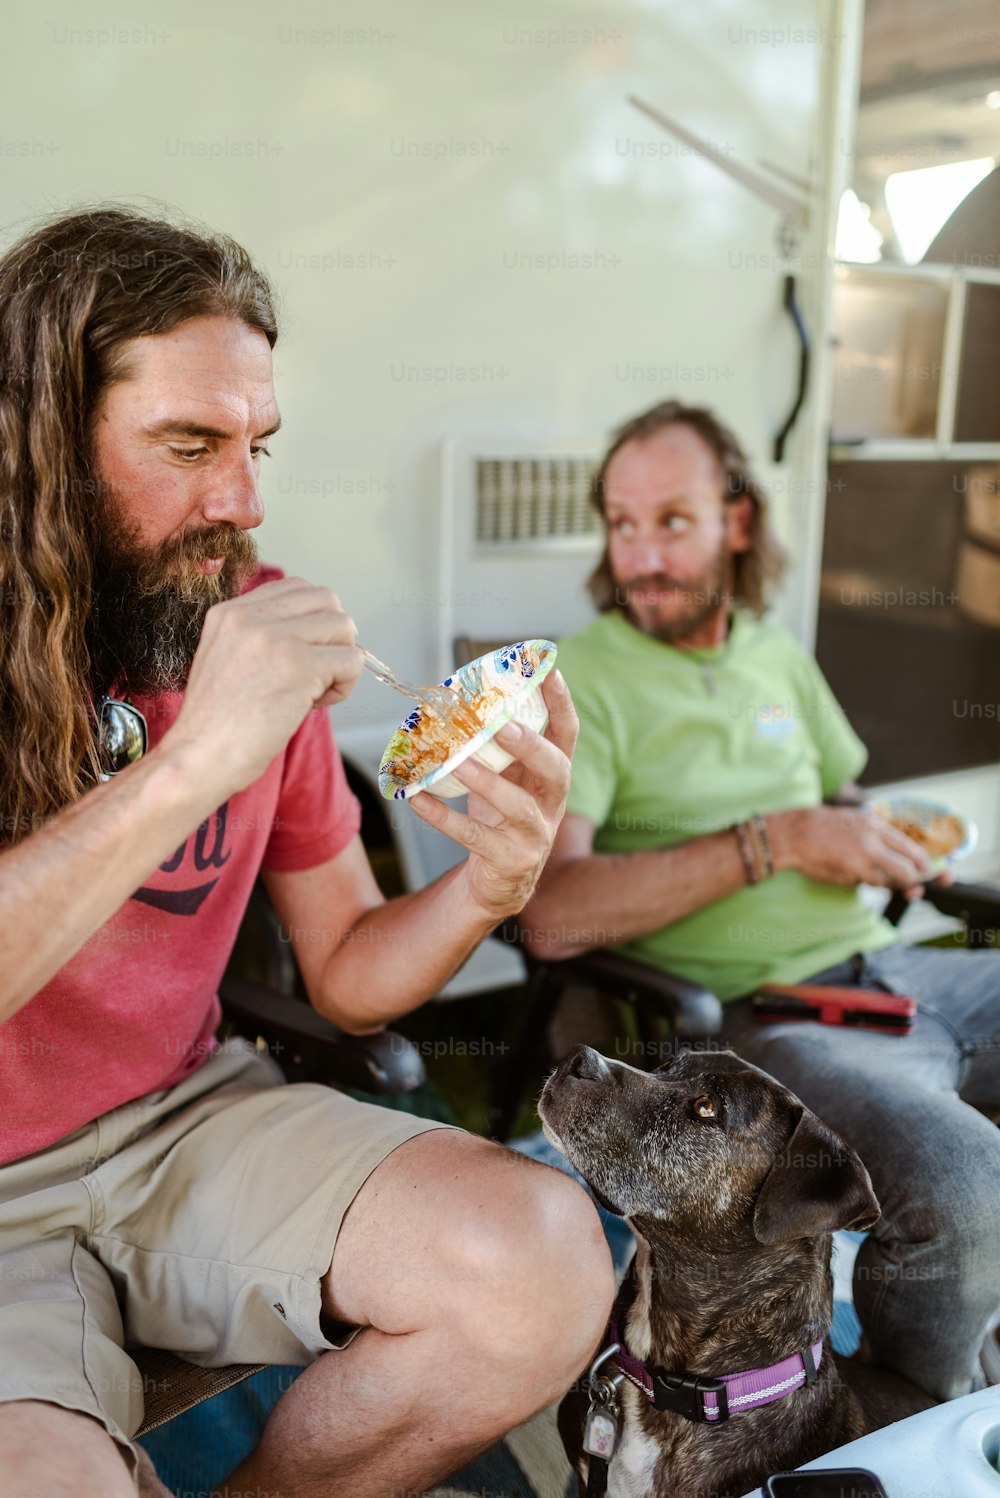 a man with long hair and a beard eating food next to a dog